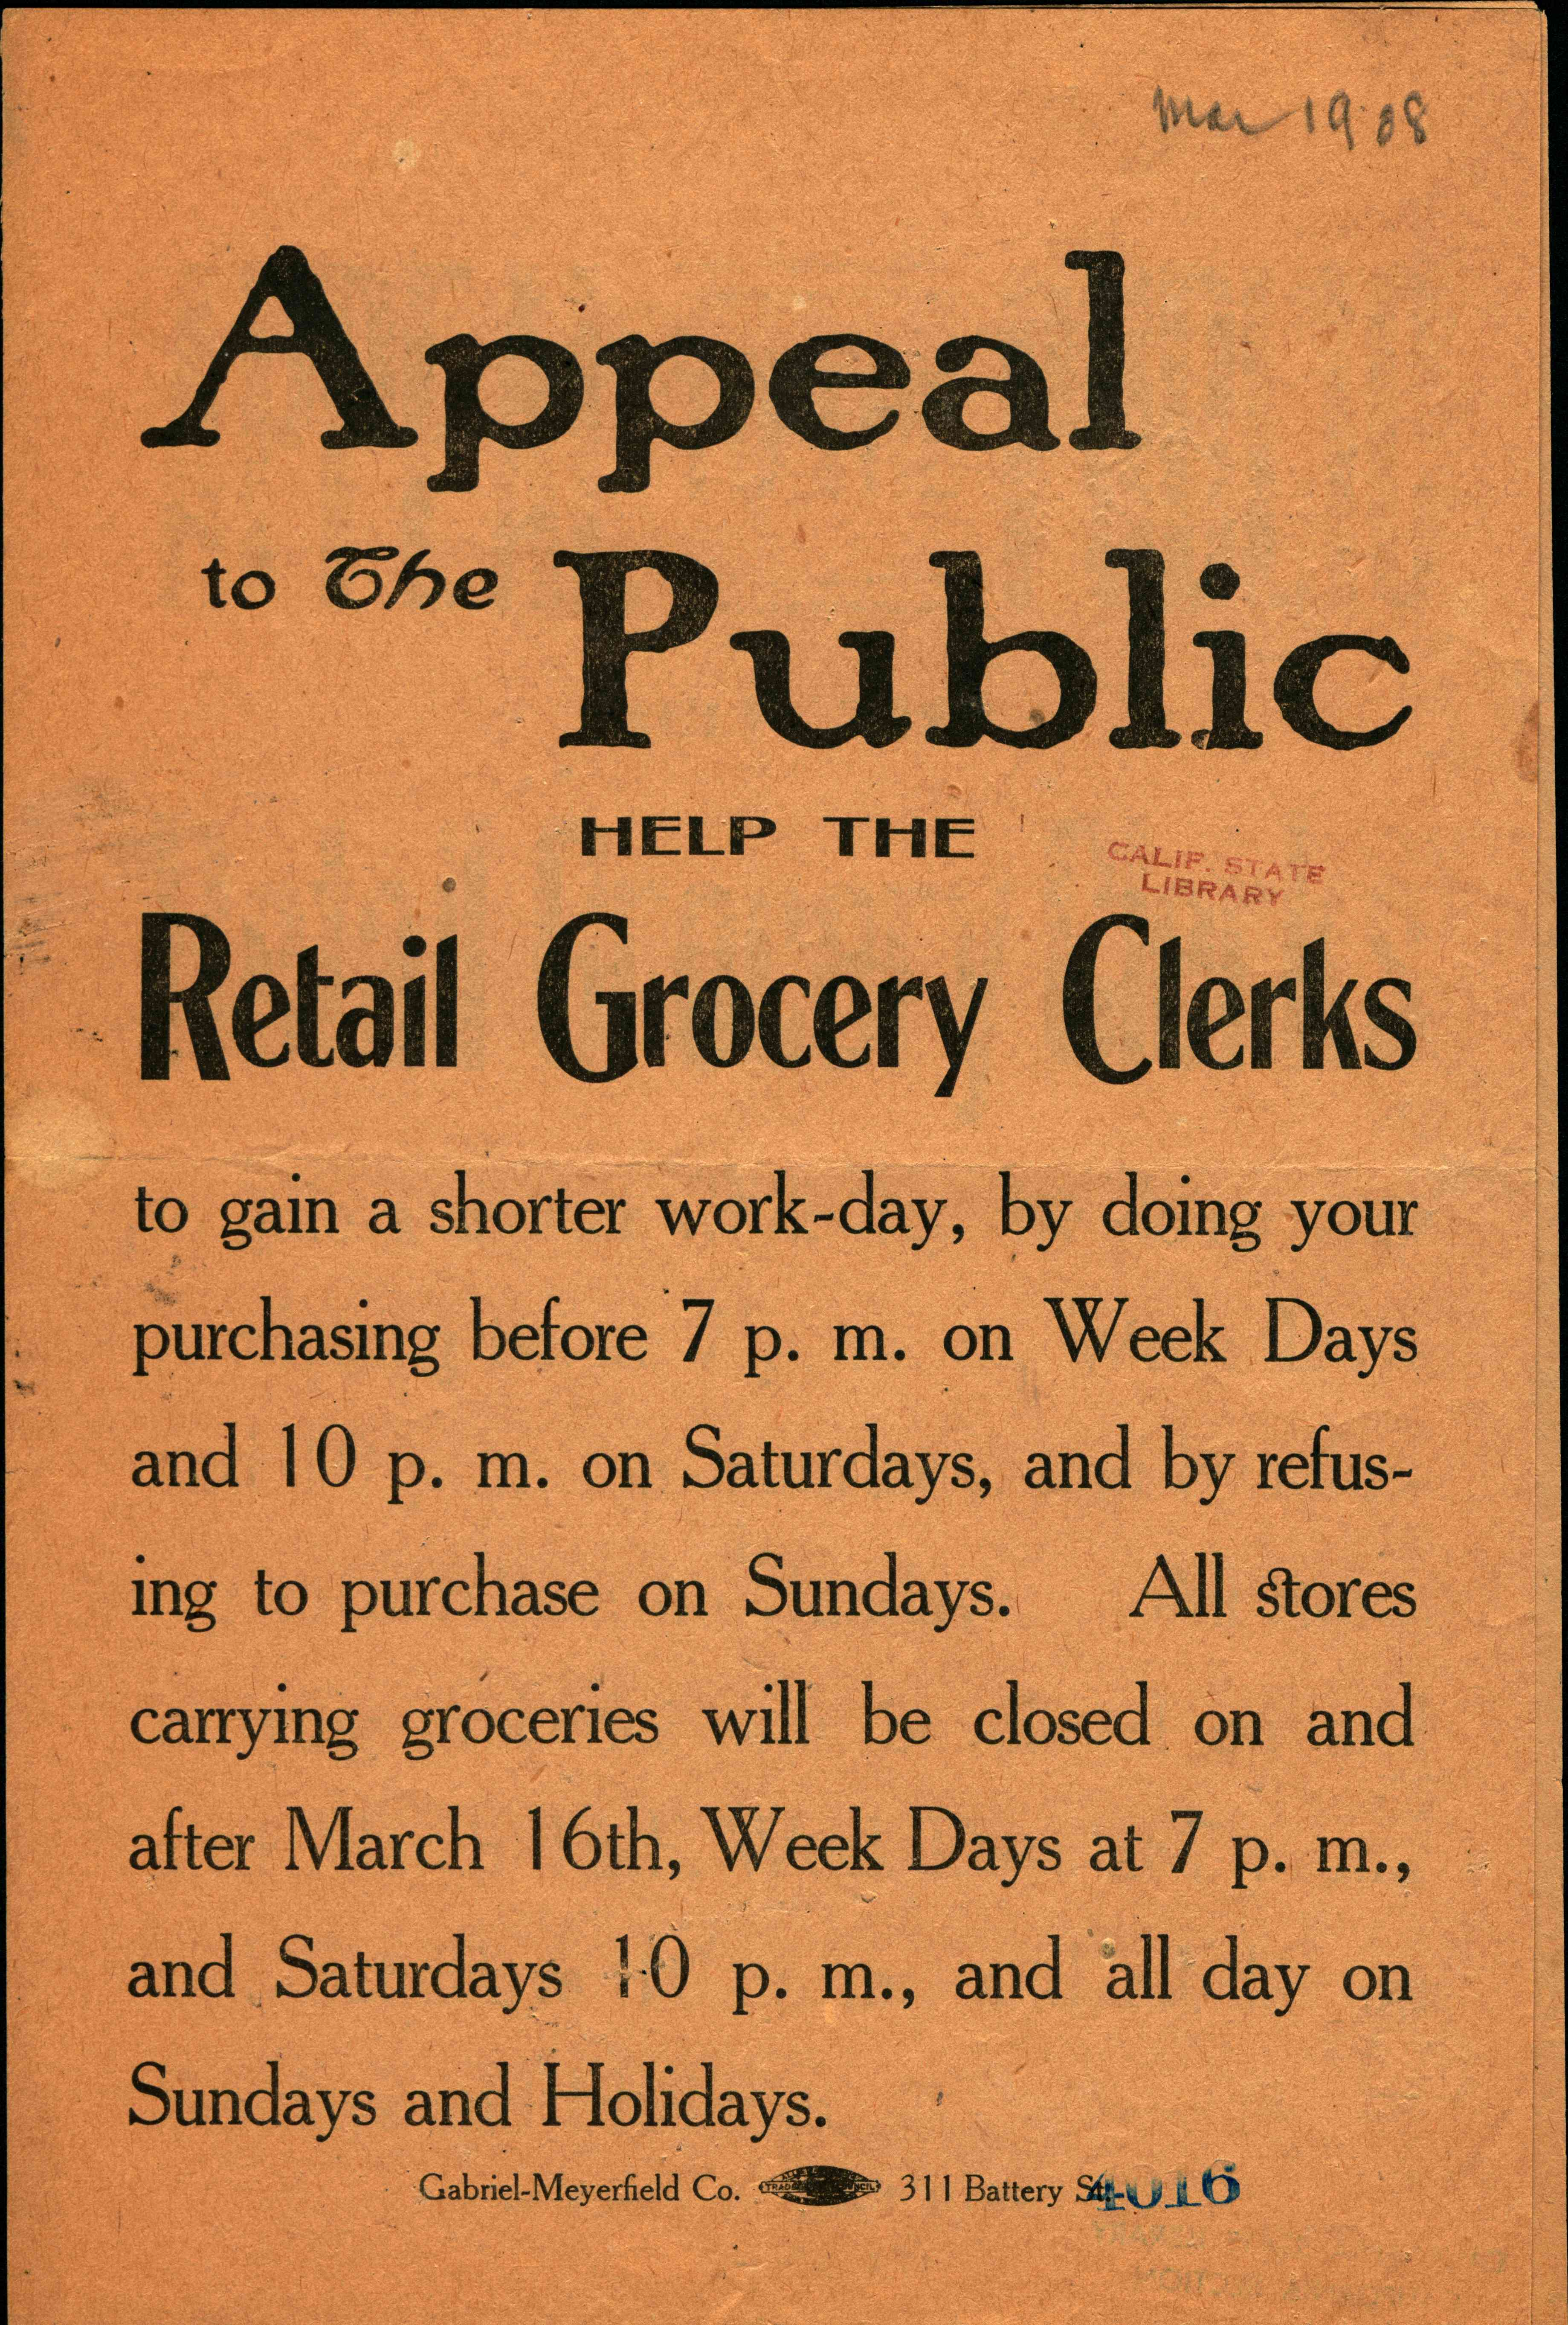 Appeal to the Public help the Retail Grocery Clerks on top of page